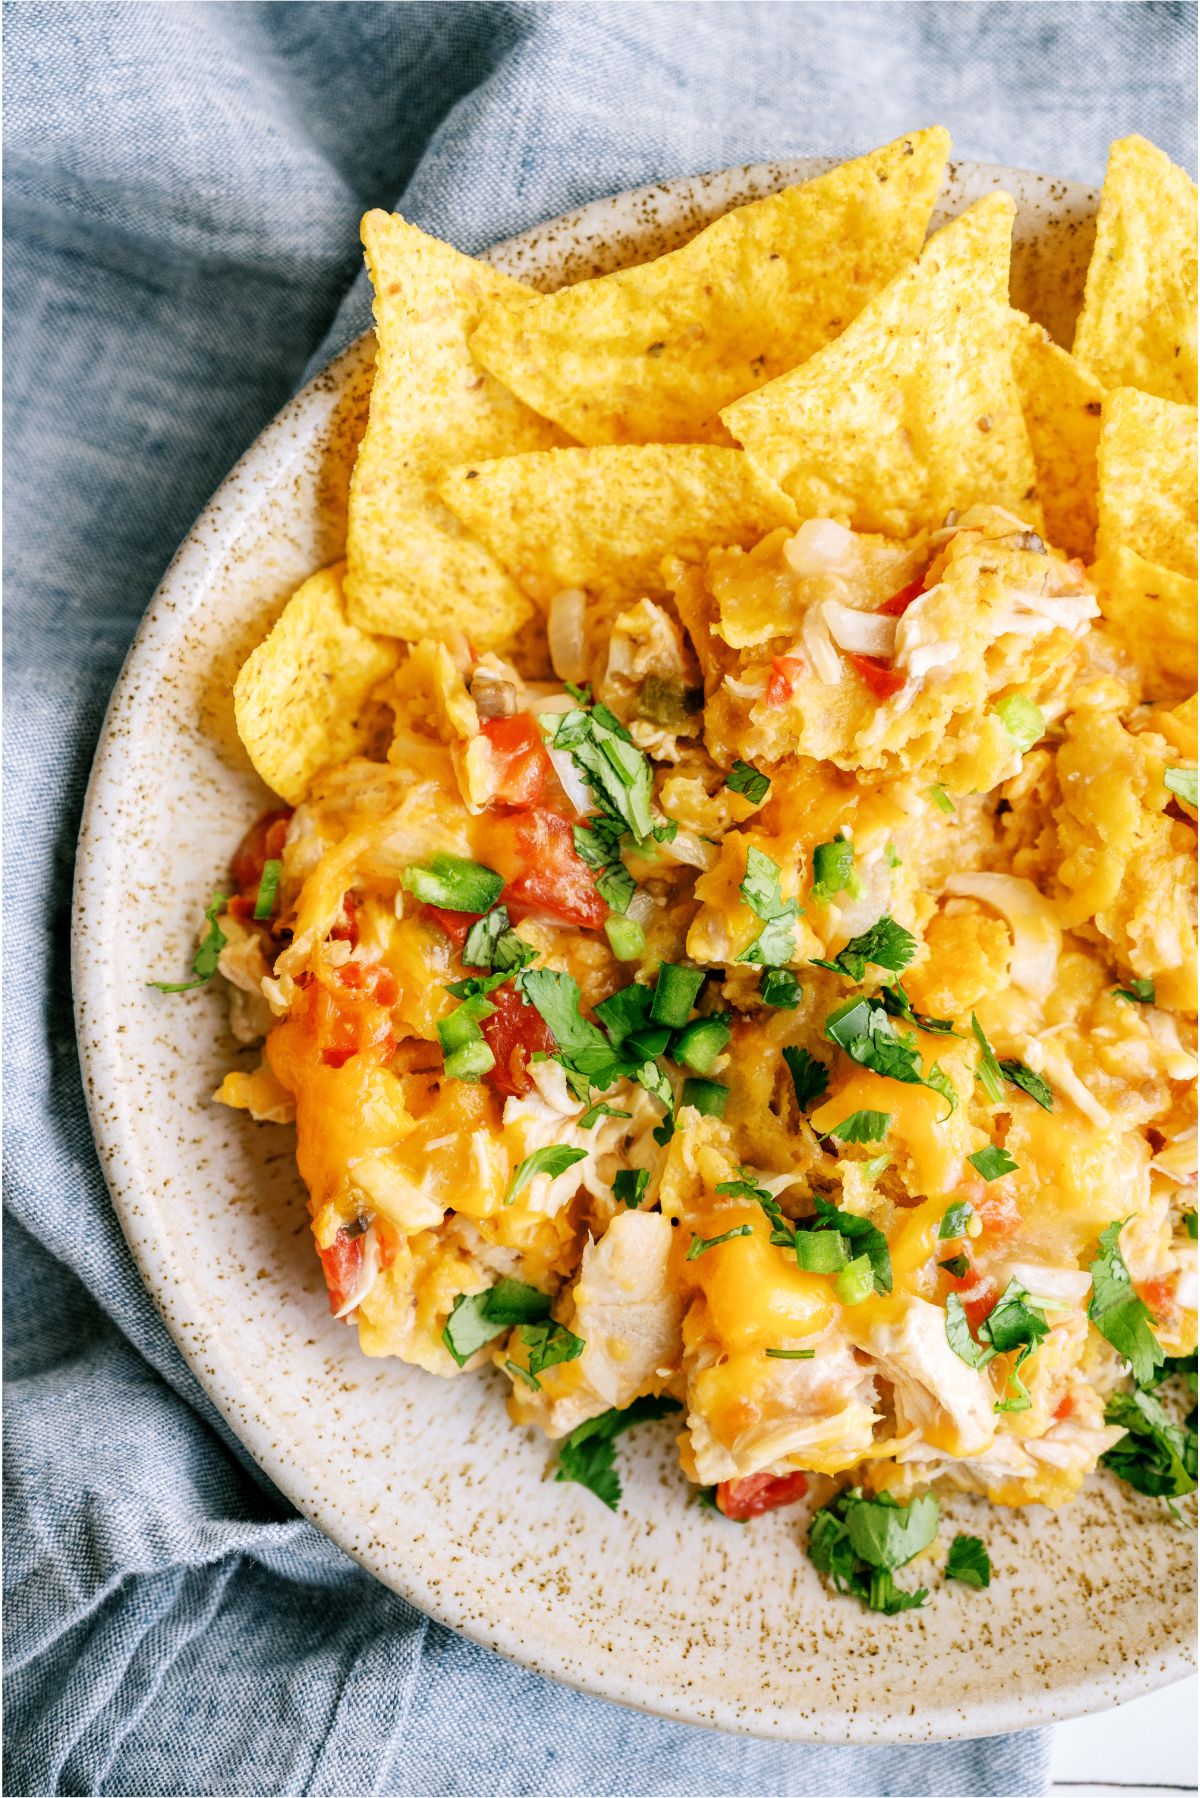 A plate of Slow Cooker King Ranch Chicken with extra tortilla chips